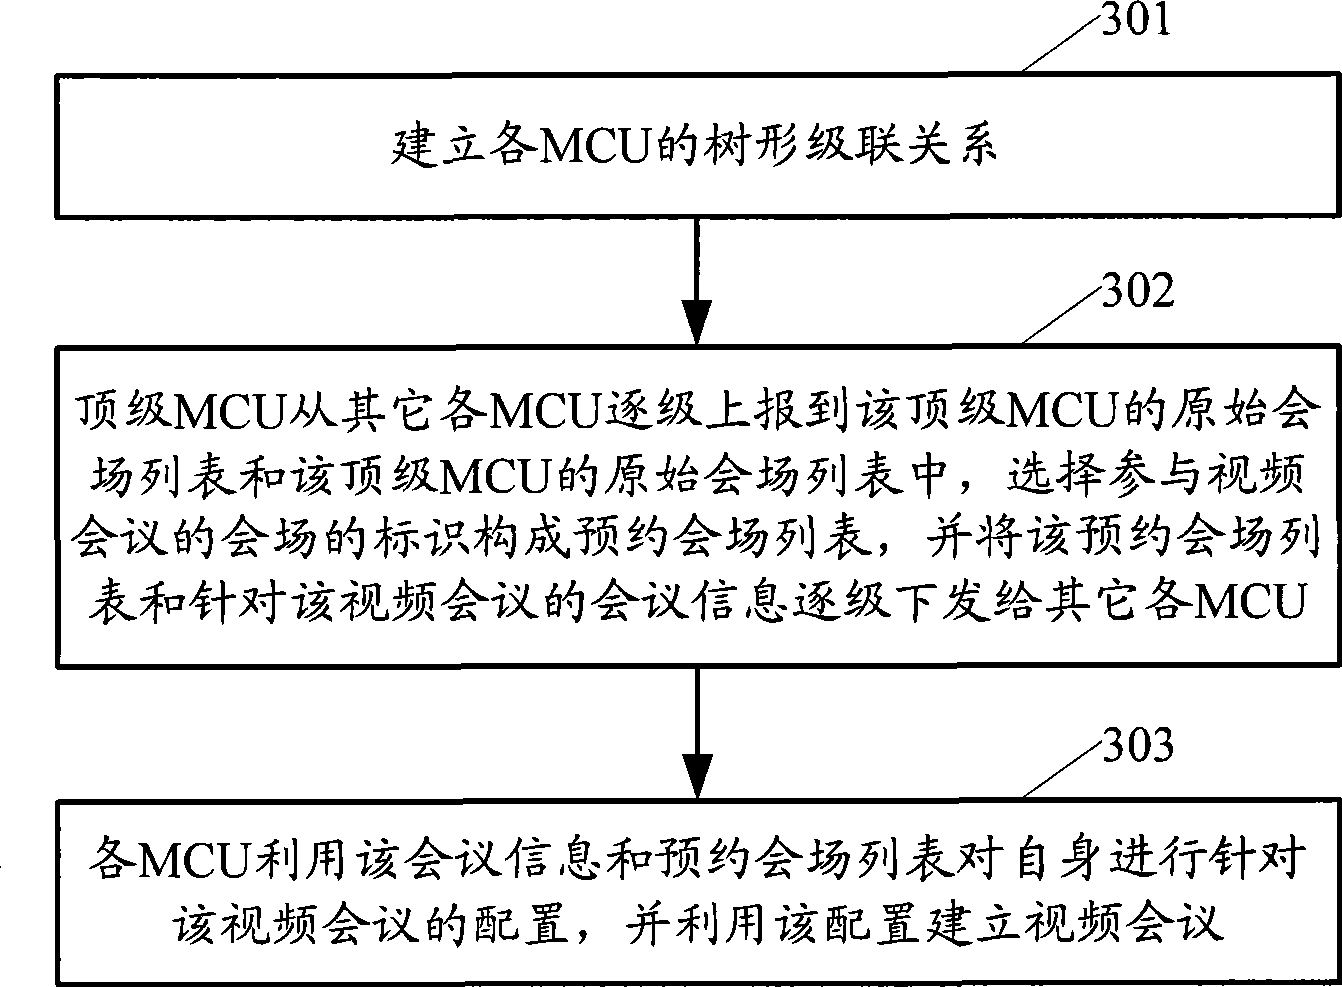 Method and system for establishing video conference